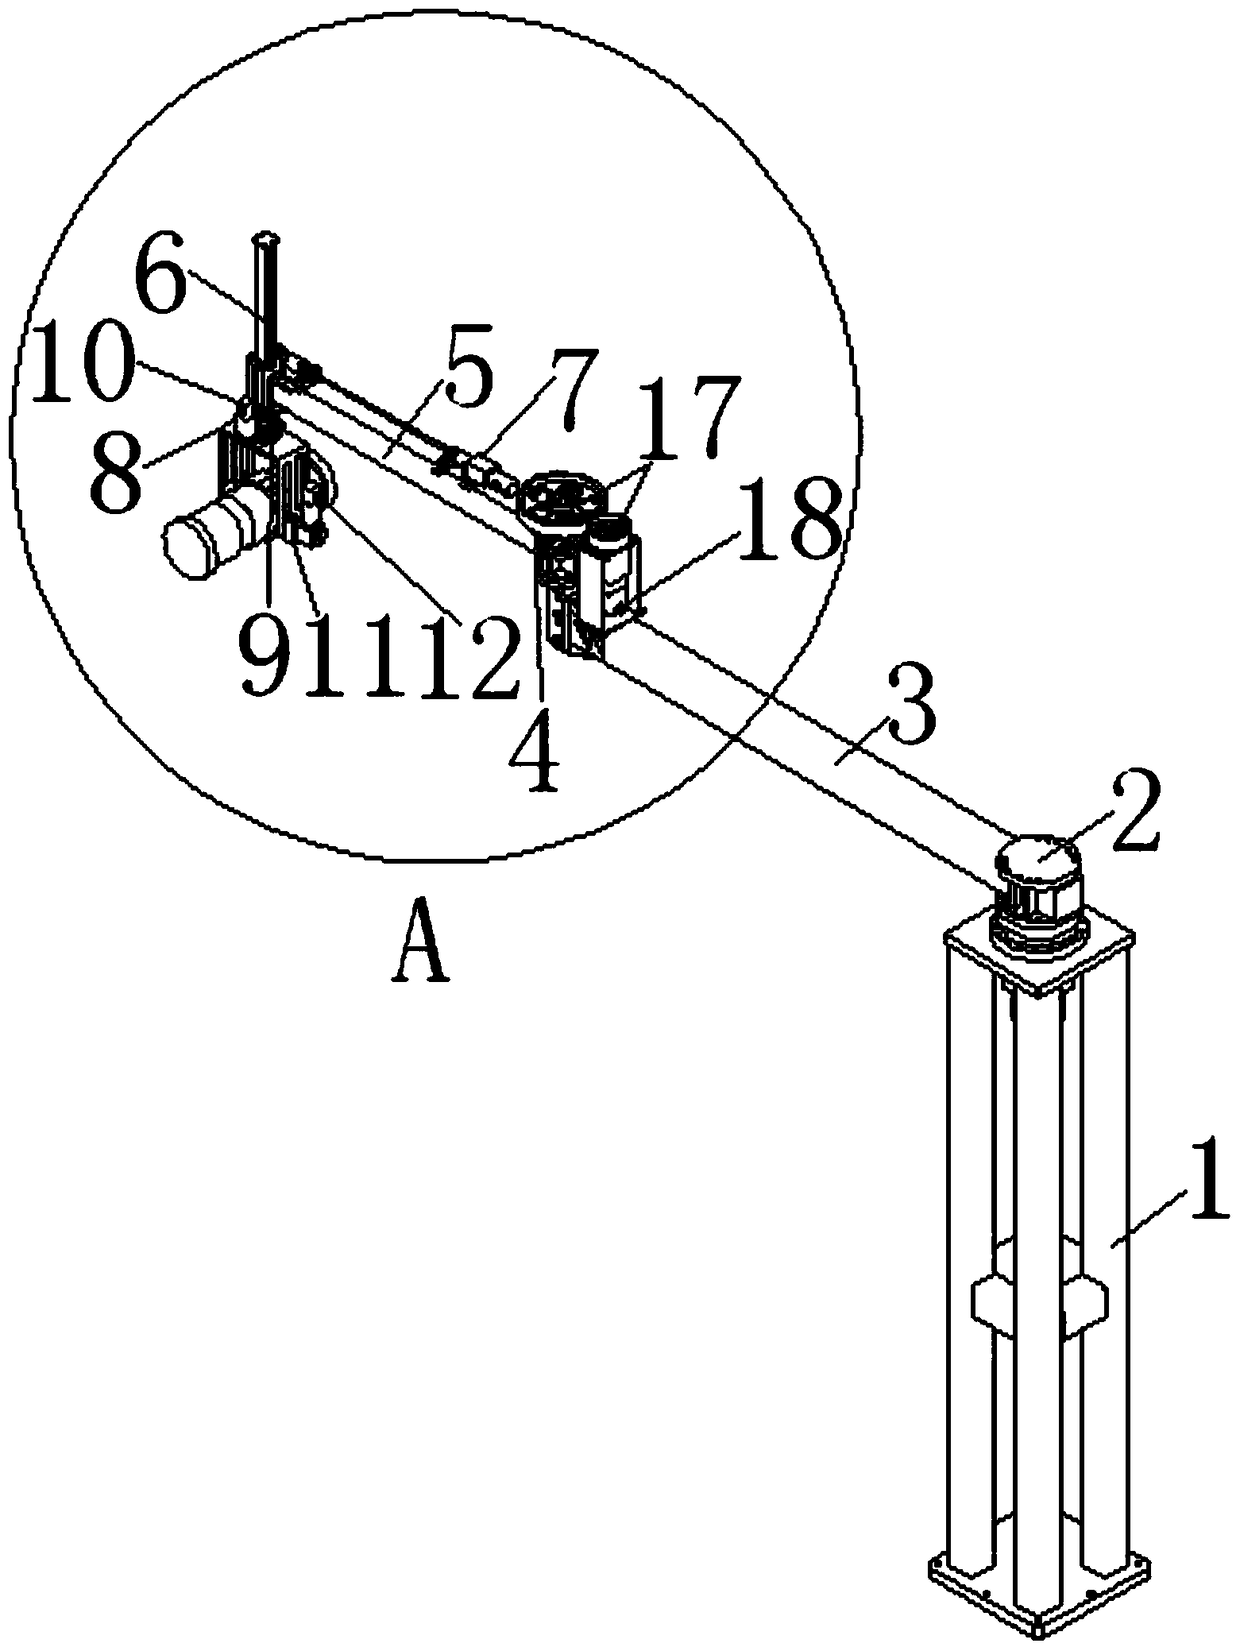 A head flaw detection mechanism